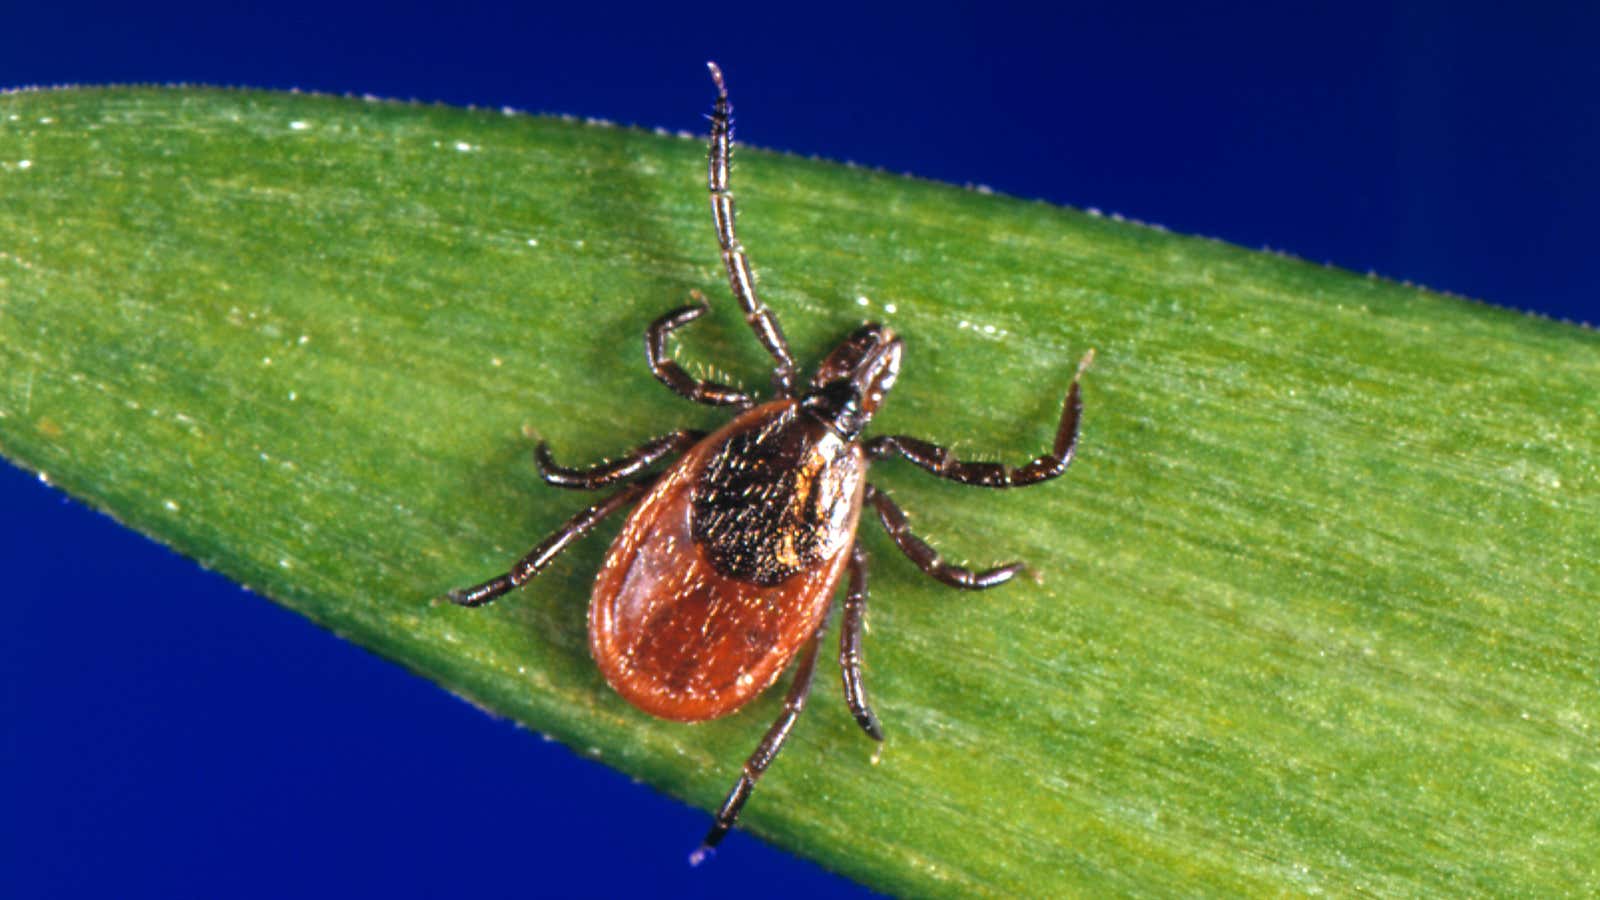 The smaller cousin to the long-horned tick, the deer tick.